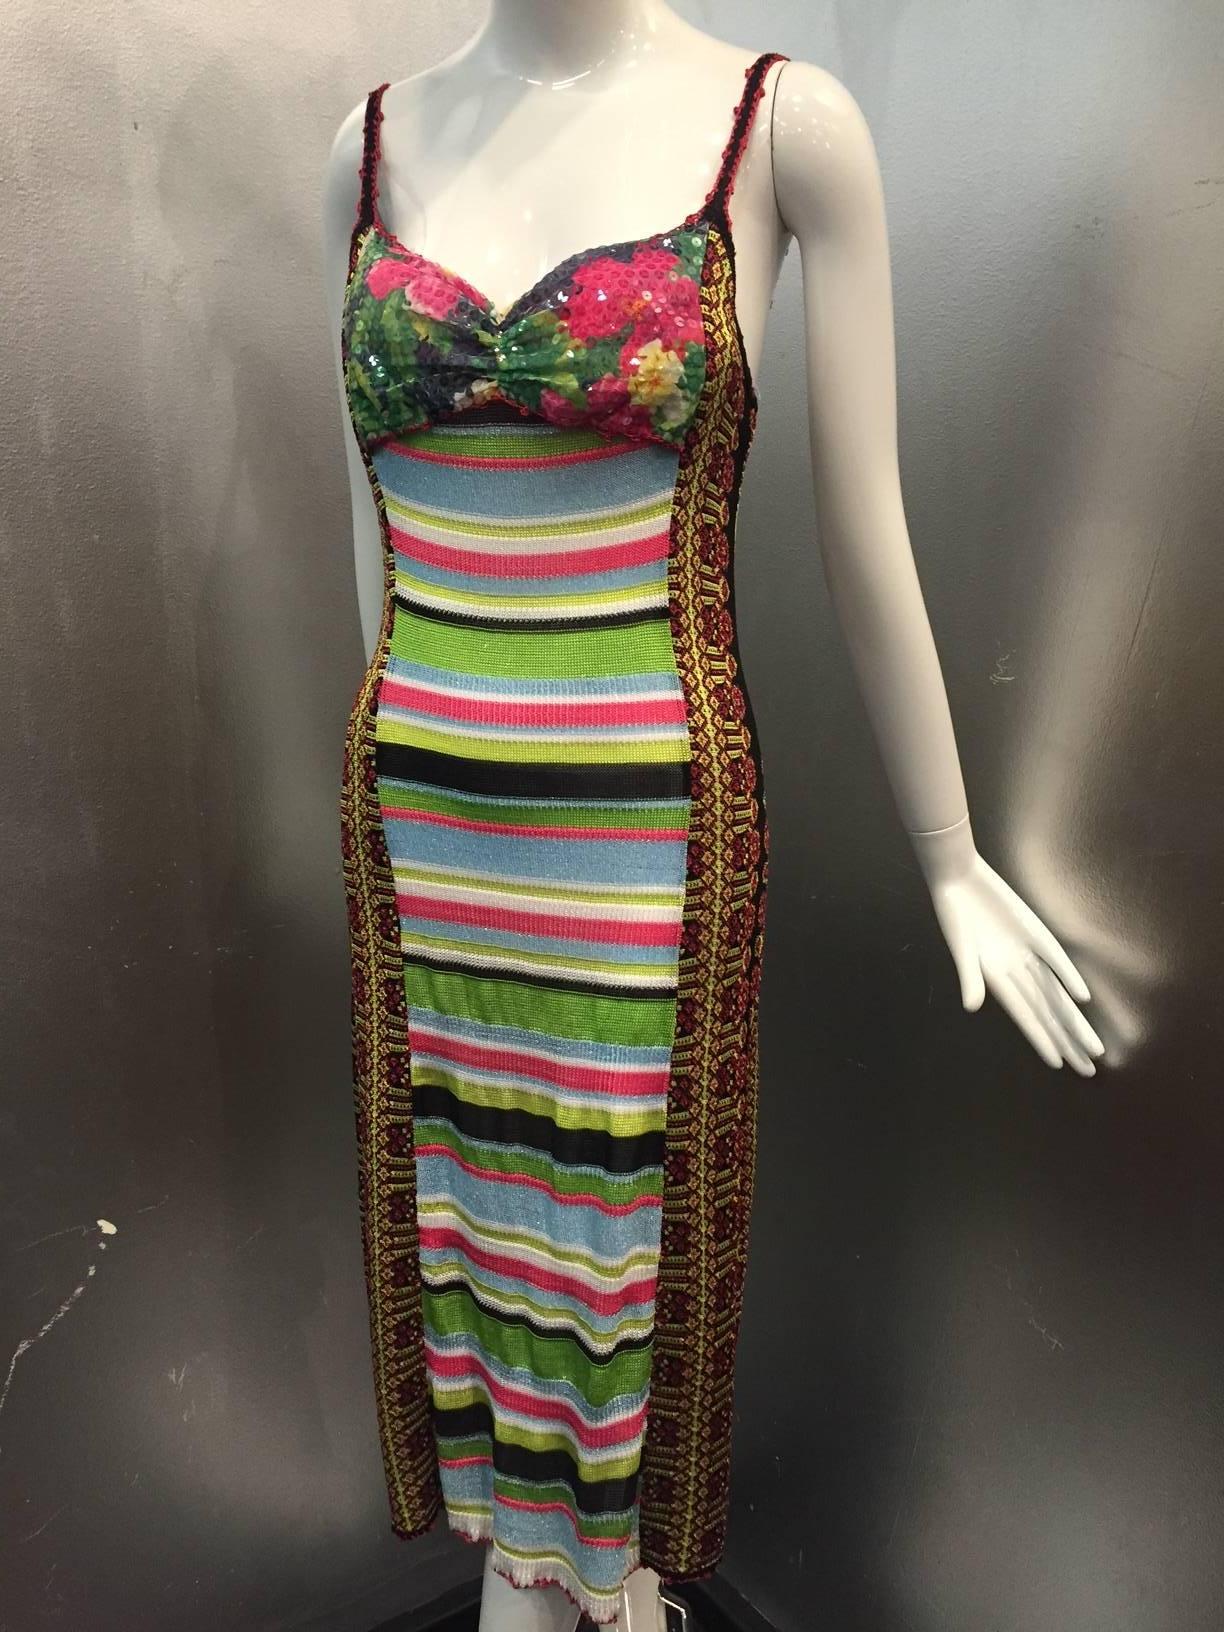 The wonderful Christian Lacroix multi-color, multi-patterned, trademark mix is in full swing with this knit and sequined Bazaar cocktail dress!  